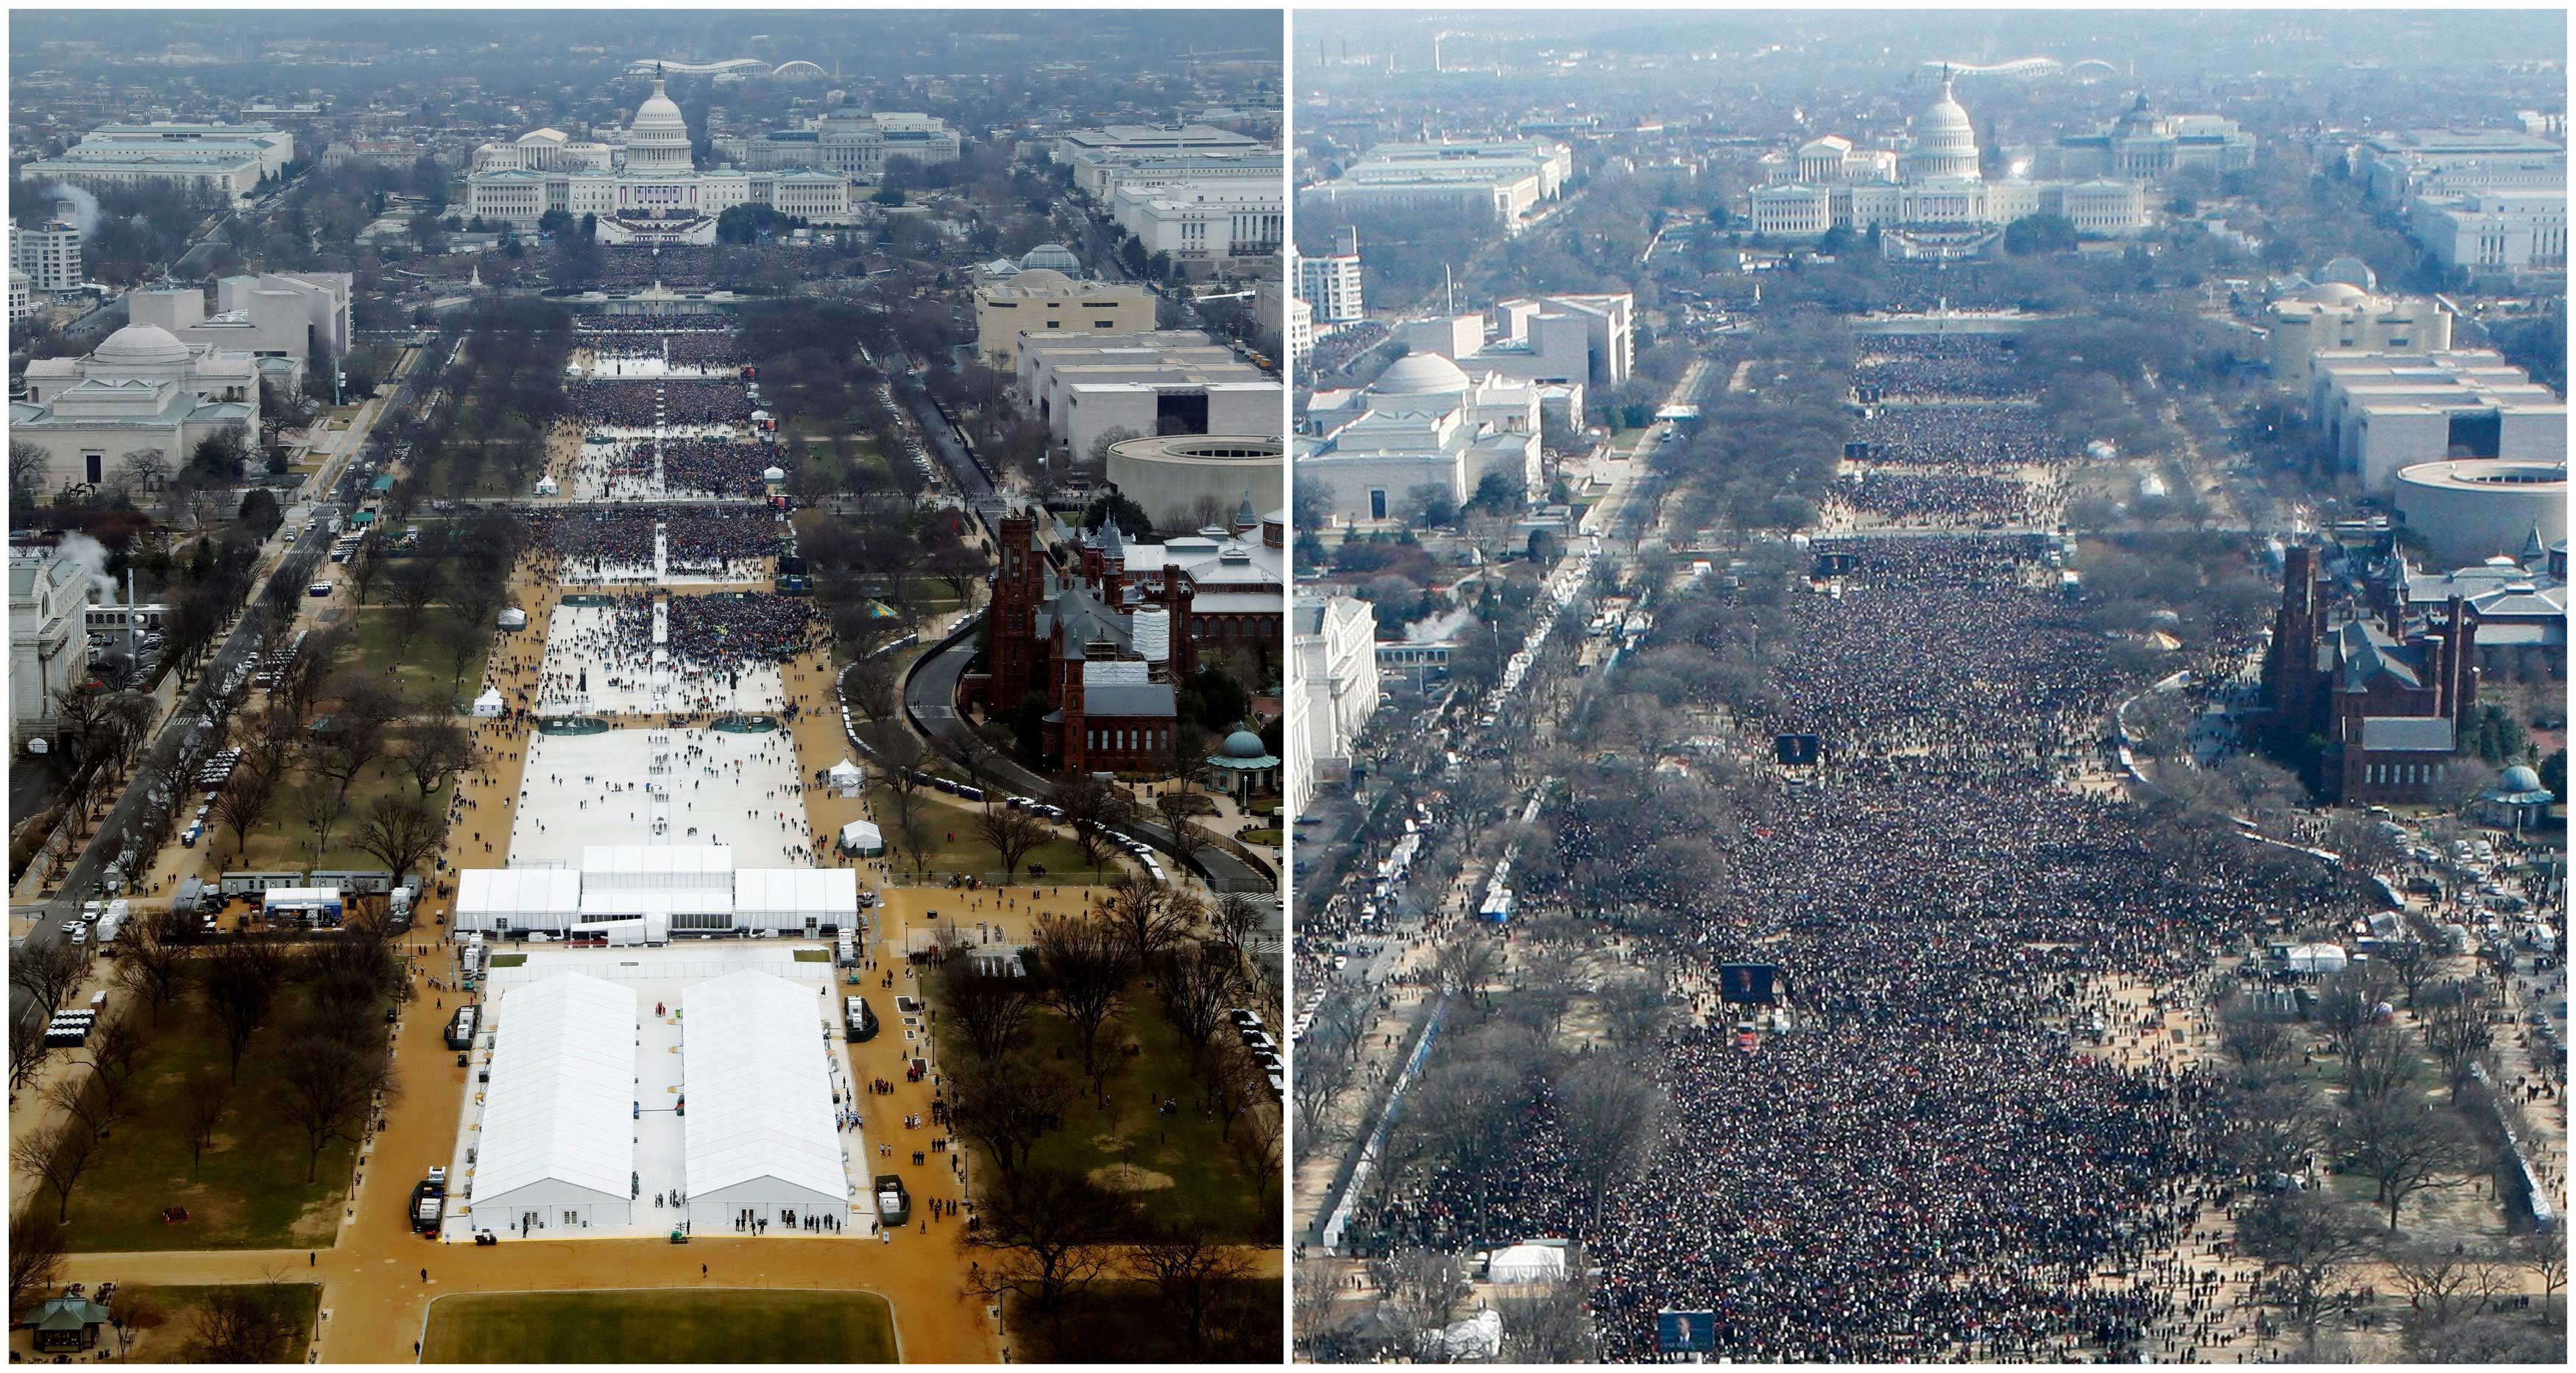 A combination of photos taken at the National Mall shows the crowds attending the inauguration ceremonies to swear in U.S. President Donald Trump at 12:01pm (L) on Jan. 20, 2017 and President Barack Obama sometime between 12:07pm and 12:26pm on Jan. 20, 2009, in Washington, D.C. (Lucas Jackson (Left) and Stelios Varias (Right)—Reuters)